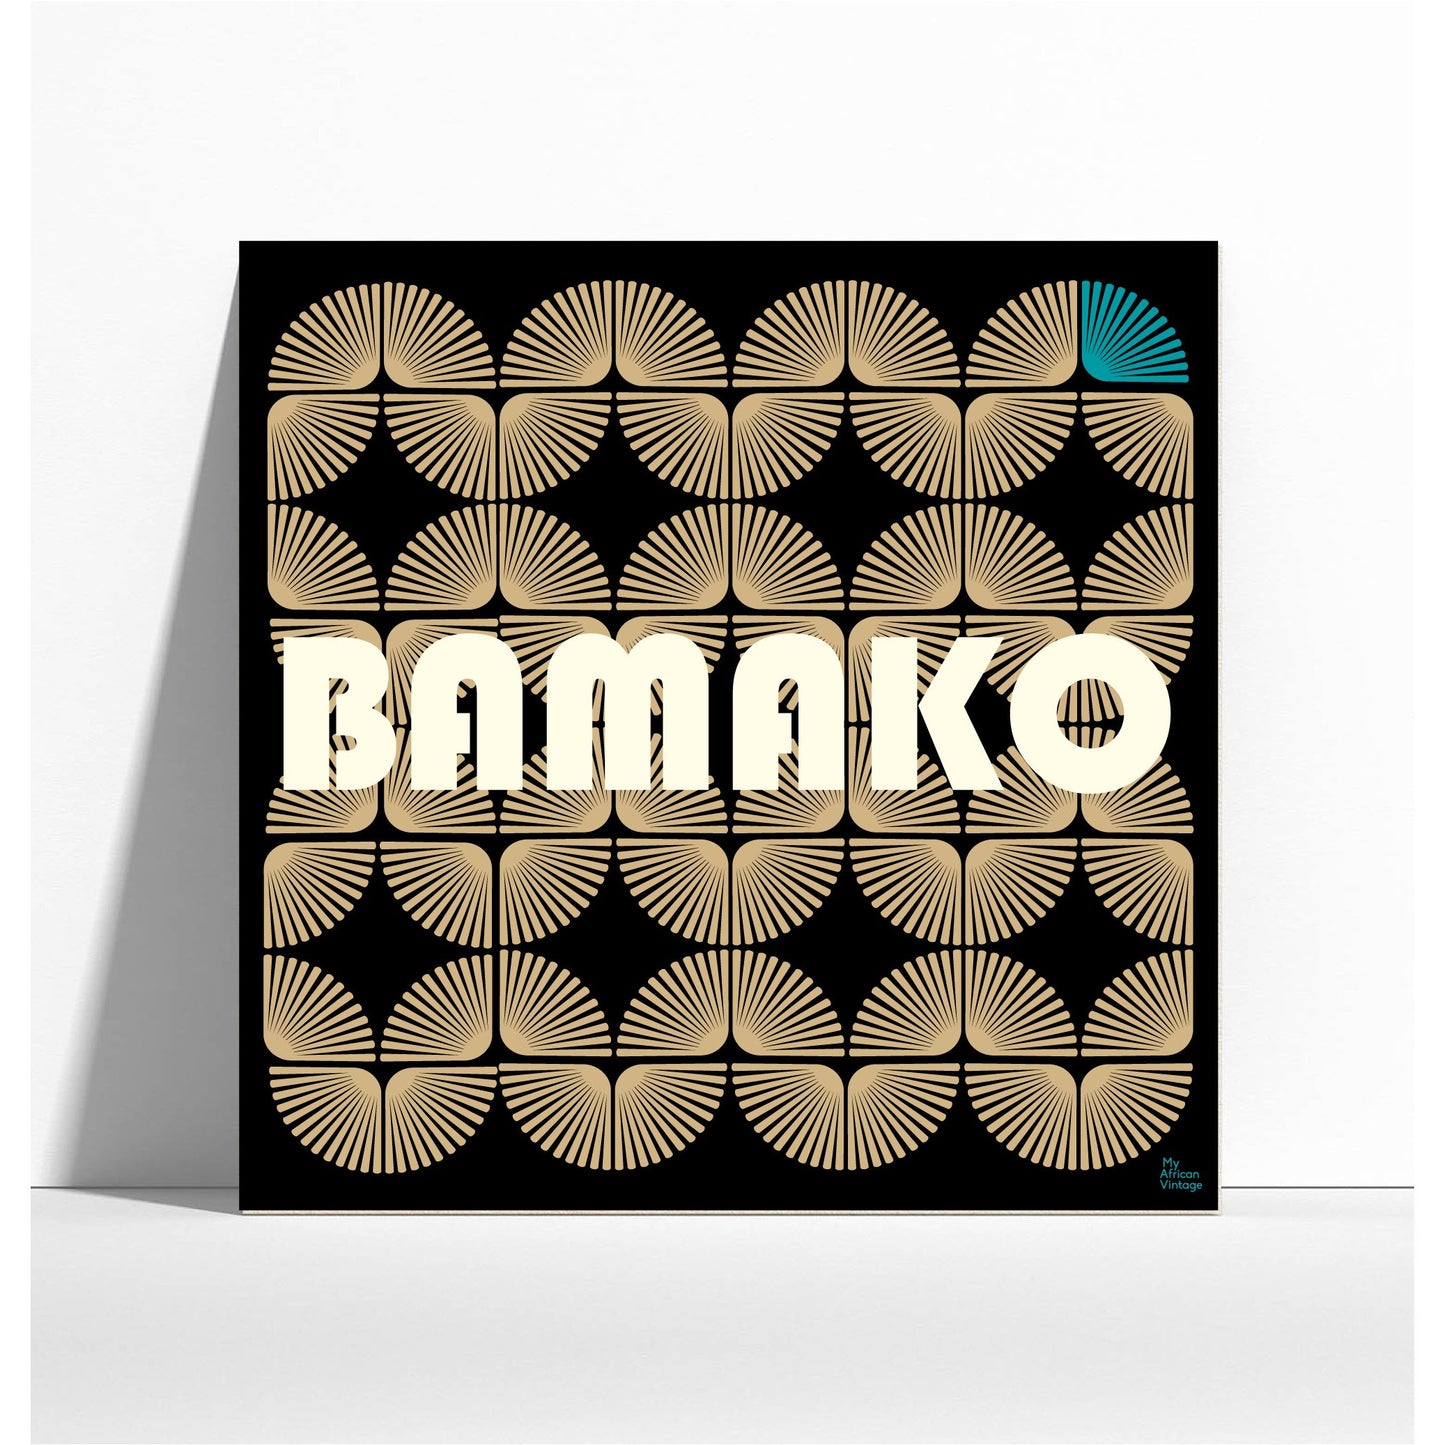 "Bamako" retro style poster - "My African Vintage" collection